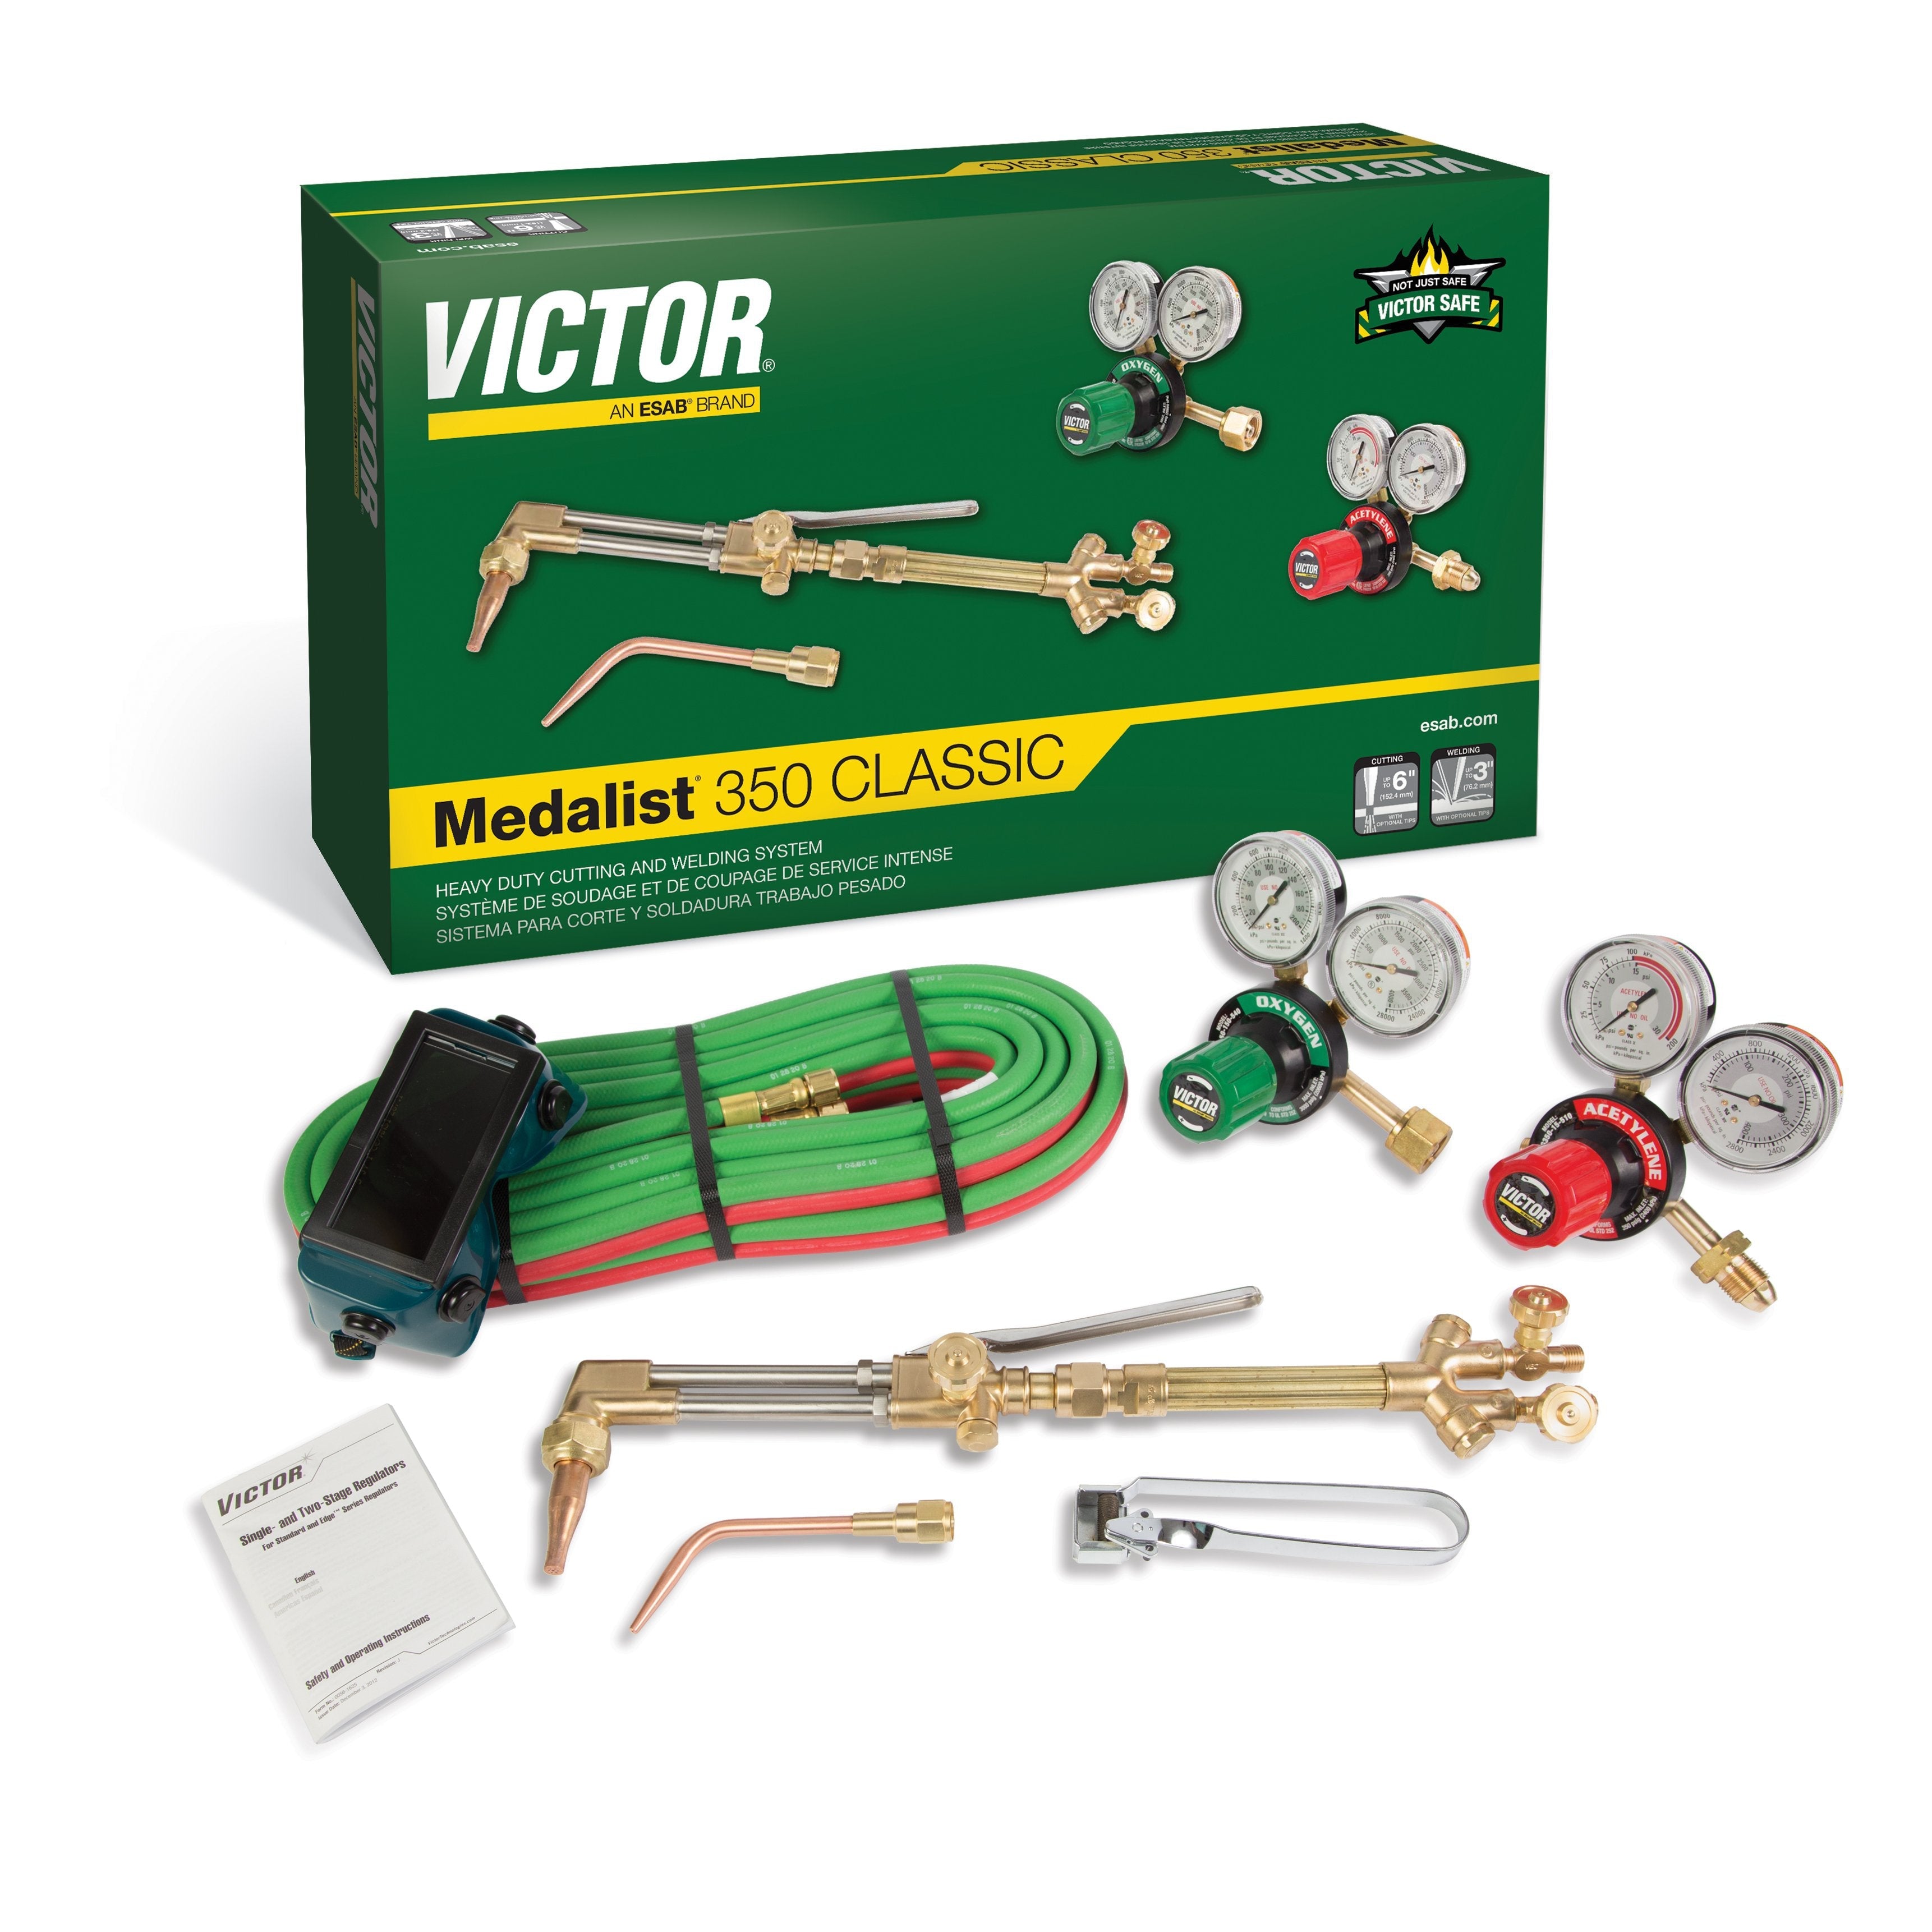 Victor Medalist G350 Classic HD Outfit, CGA 540/300 - 0384-2699